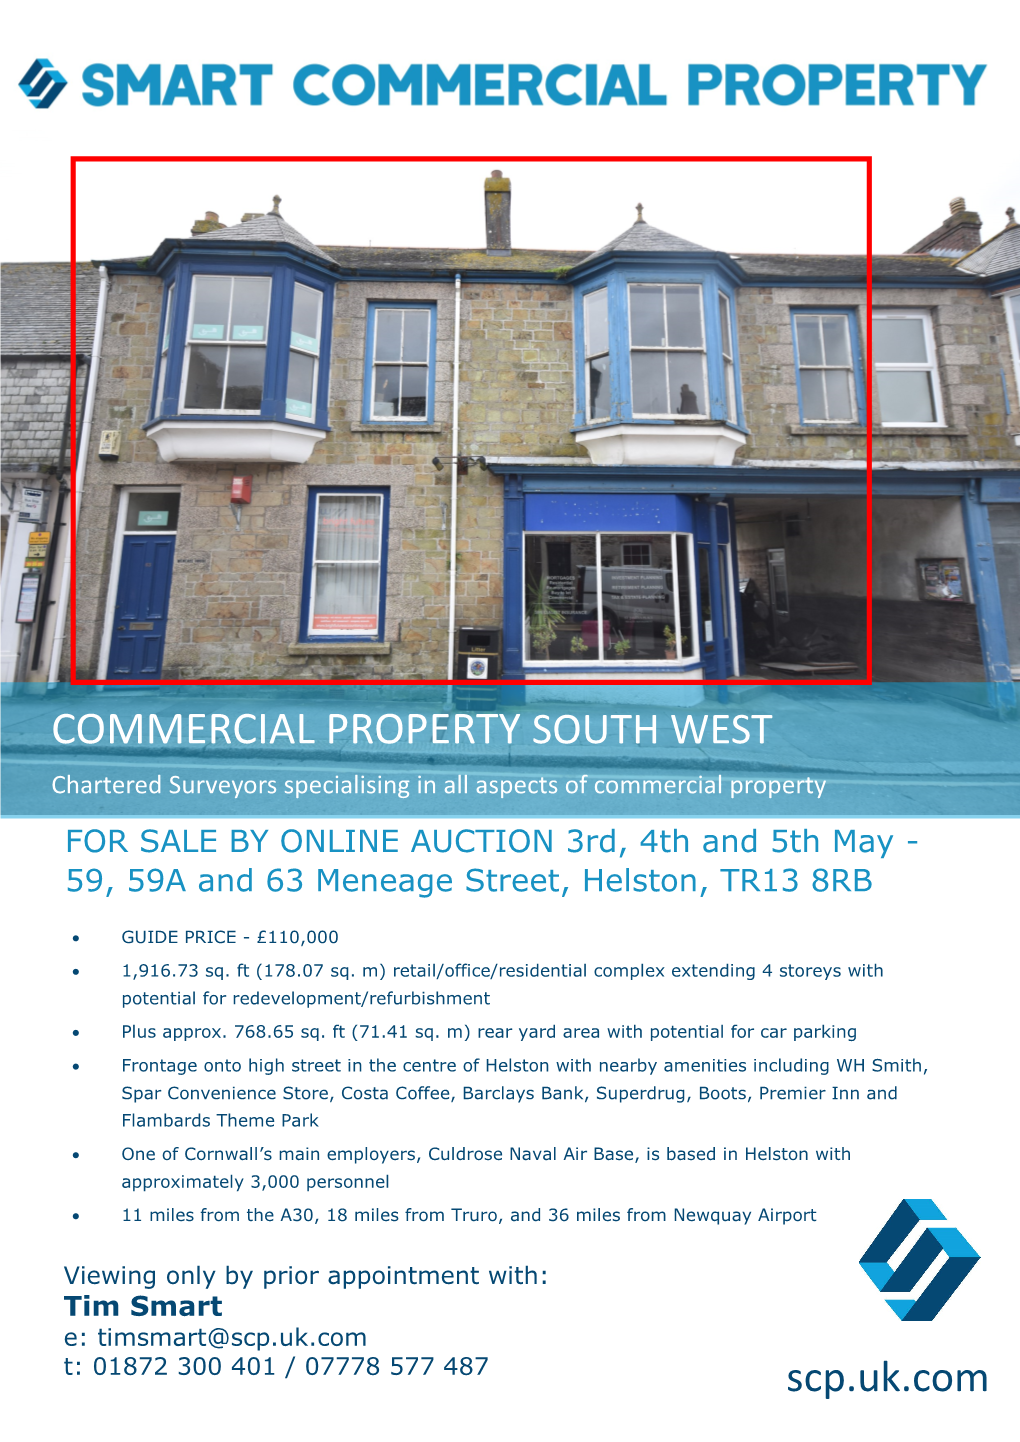 Commercial Property South West